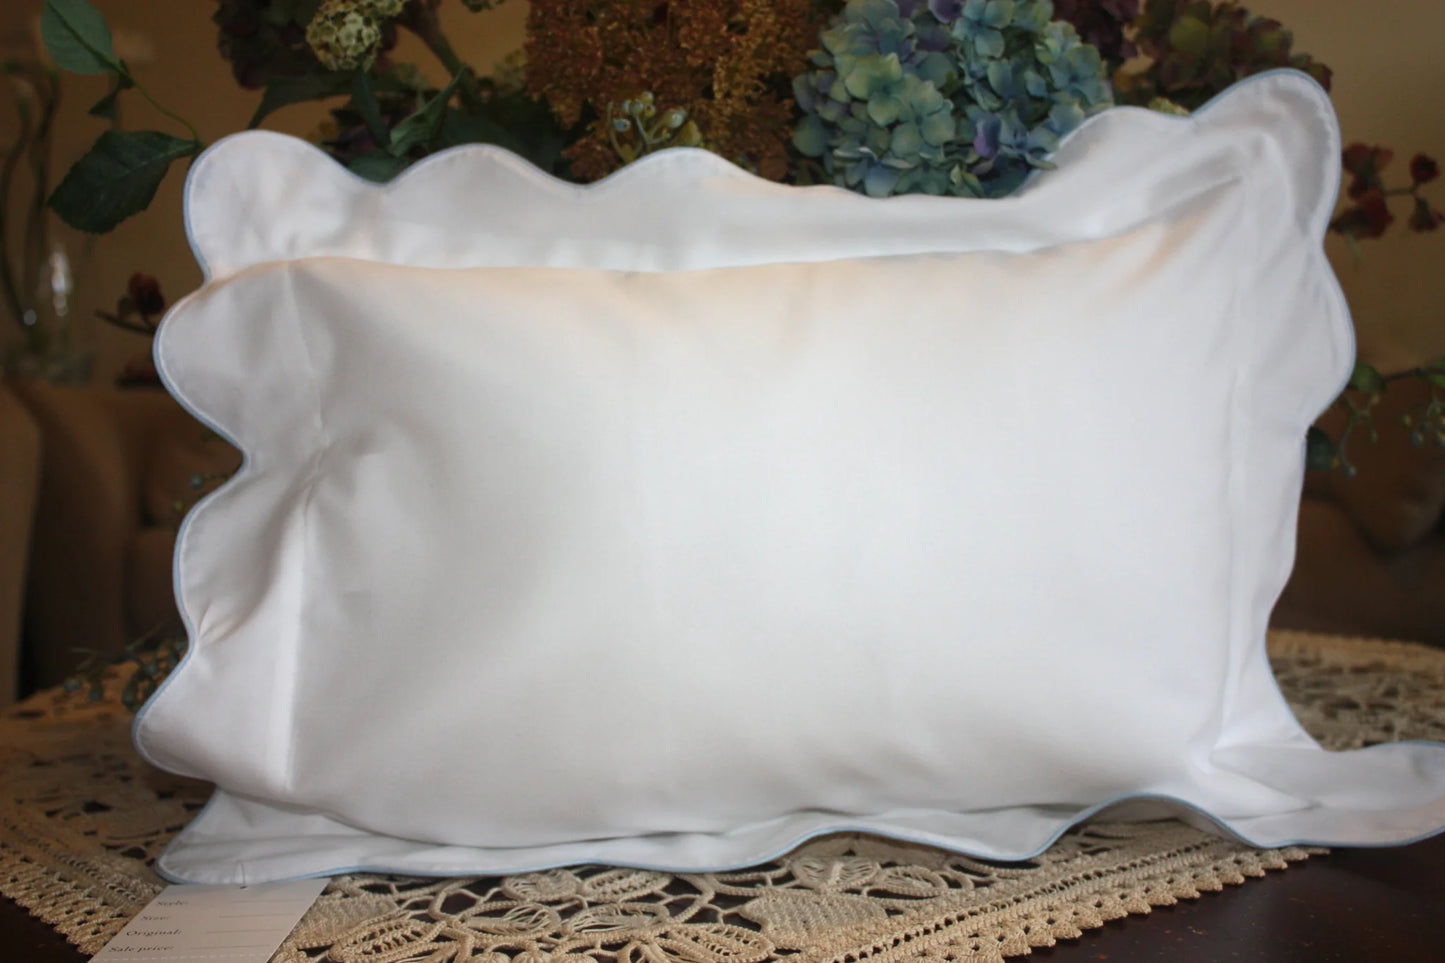 Waves Trim Pillow with Insert (12x16)